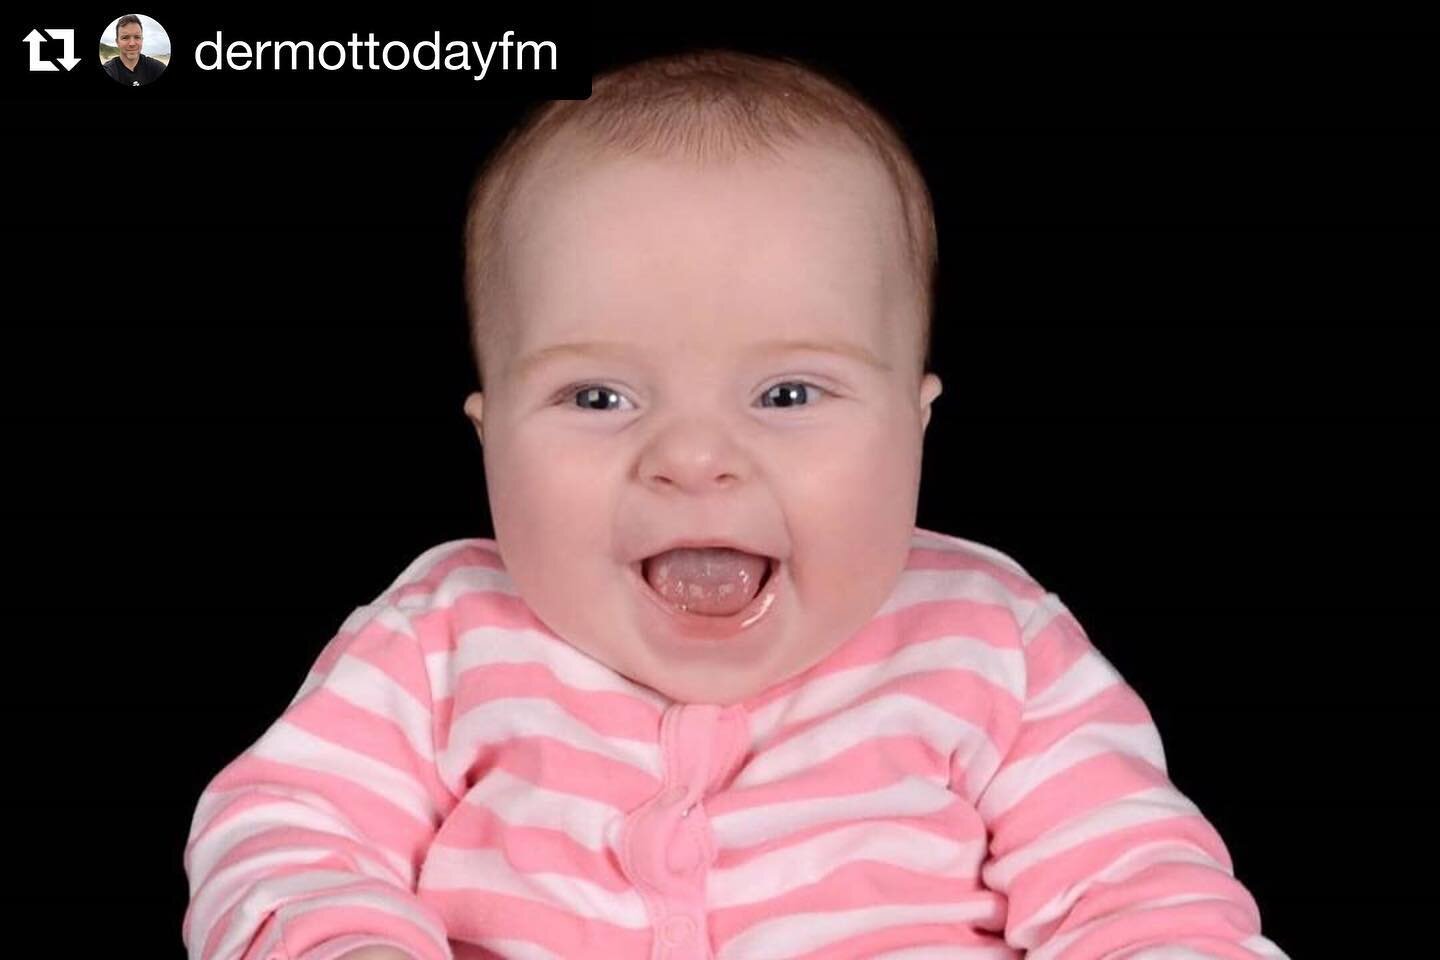 #Repost @dermottodayfm with @get_repost
・・・
Look at this beauty. 😄 This is little baby Olivia or &quot;Livie&quot; from Dublin. We had her mum, Karen,  on our @todayfm show this morning. Livie was just diagnosed with SMA, Spinal Muscular Atrophy. Sh